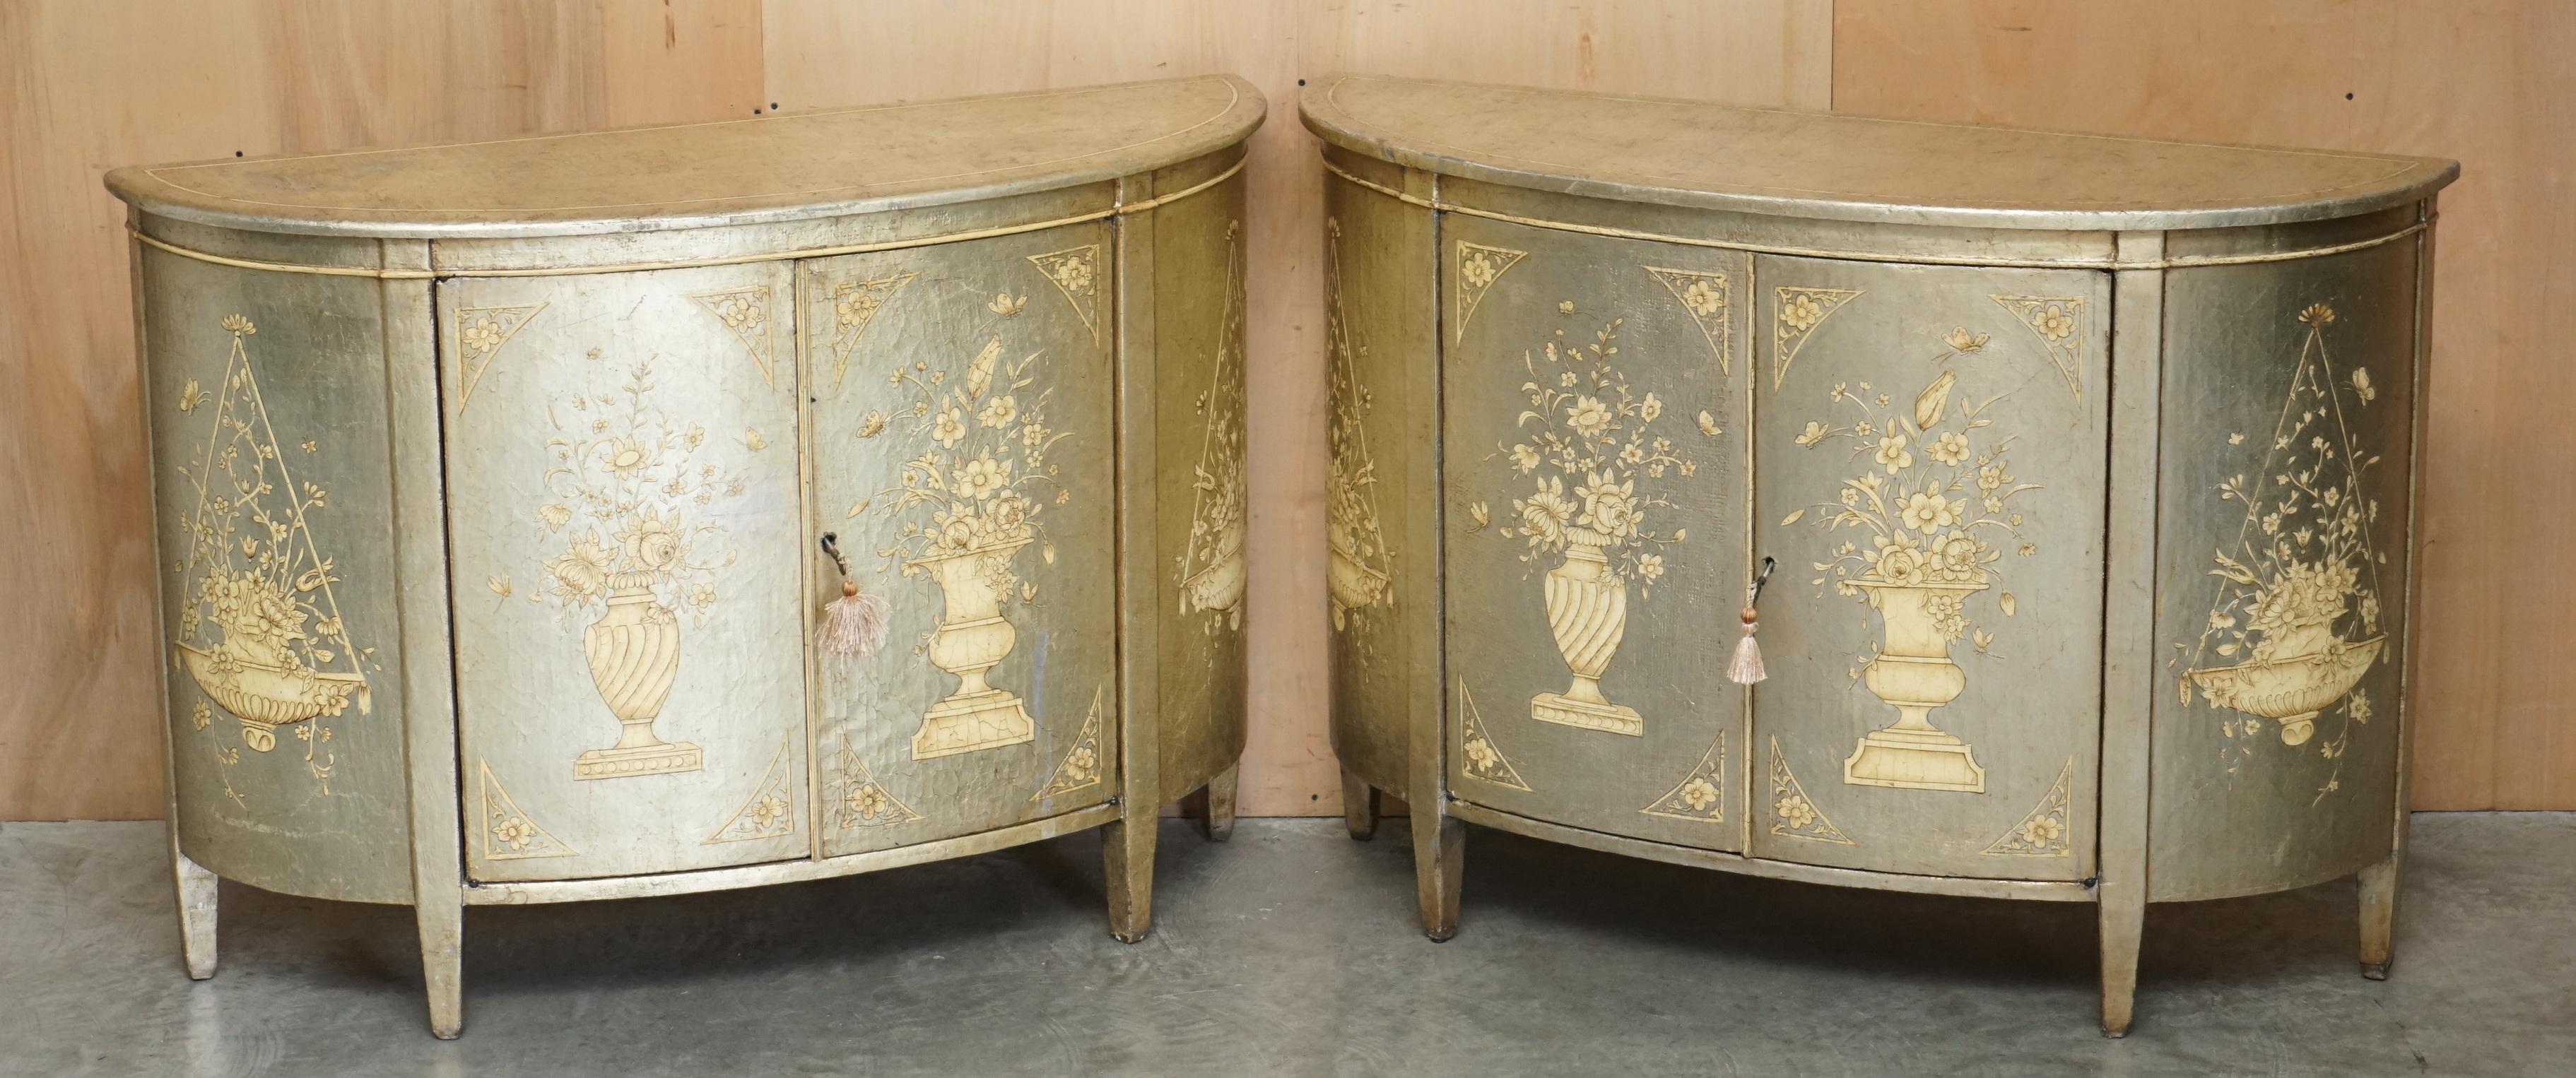 Royal House Antiques

Royal House Antiques is delighted to offer for sale this exquisite pair of hand made Theodore Alexander Demi Lune sideboards with silver leaf Adams Sheraton Revival style paintings 

Please note the delivery fee listed is just